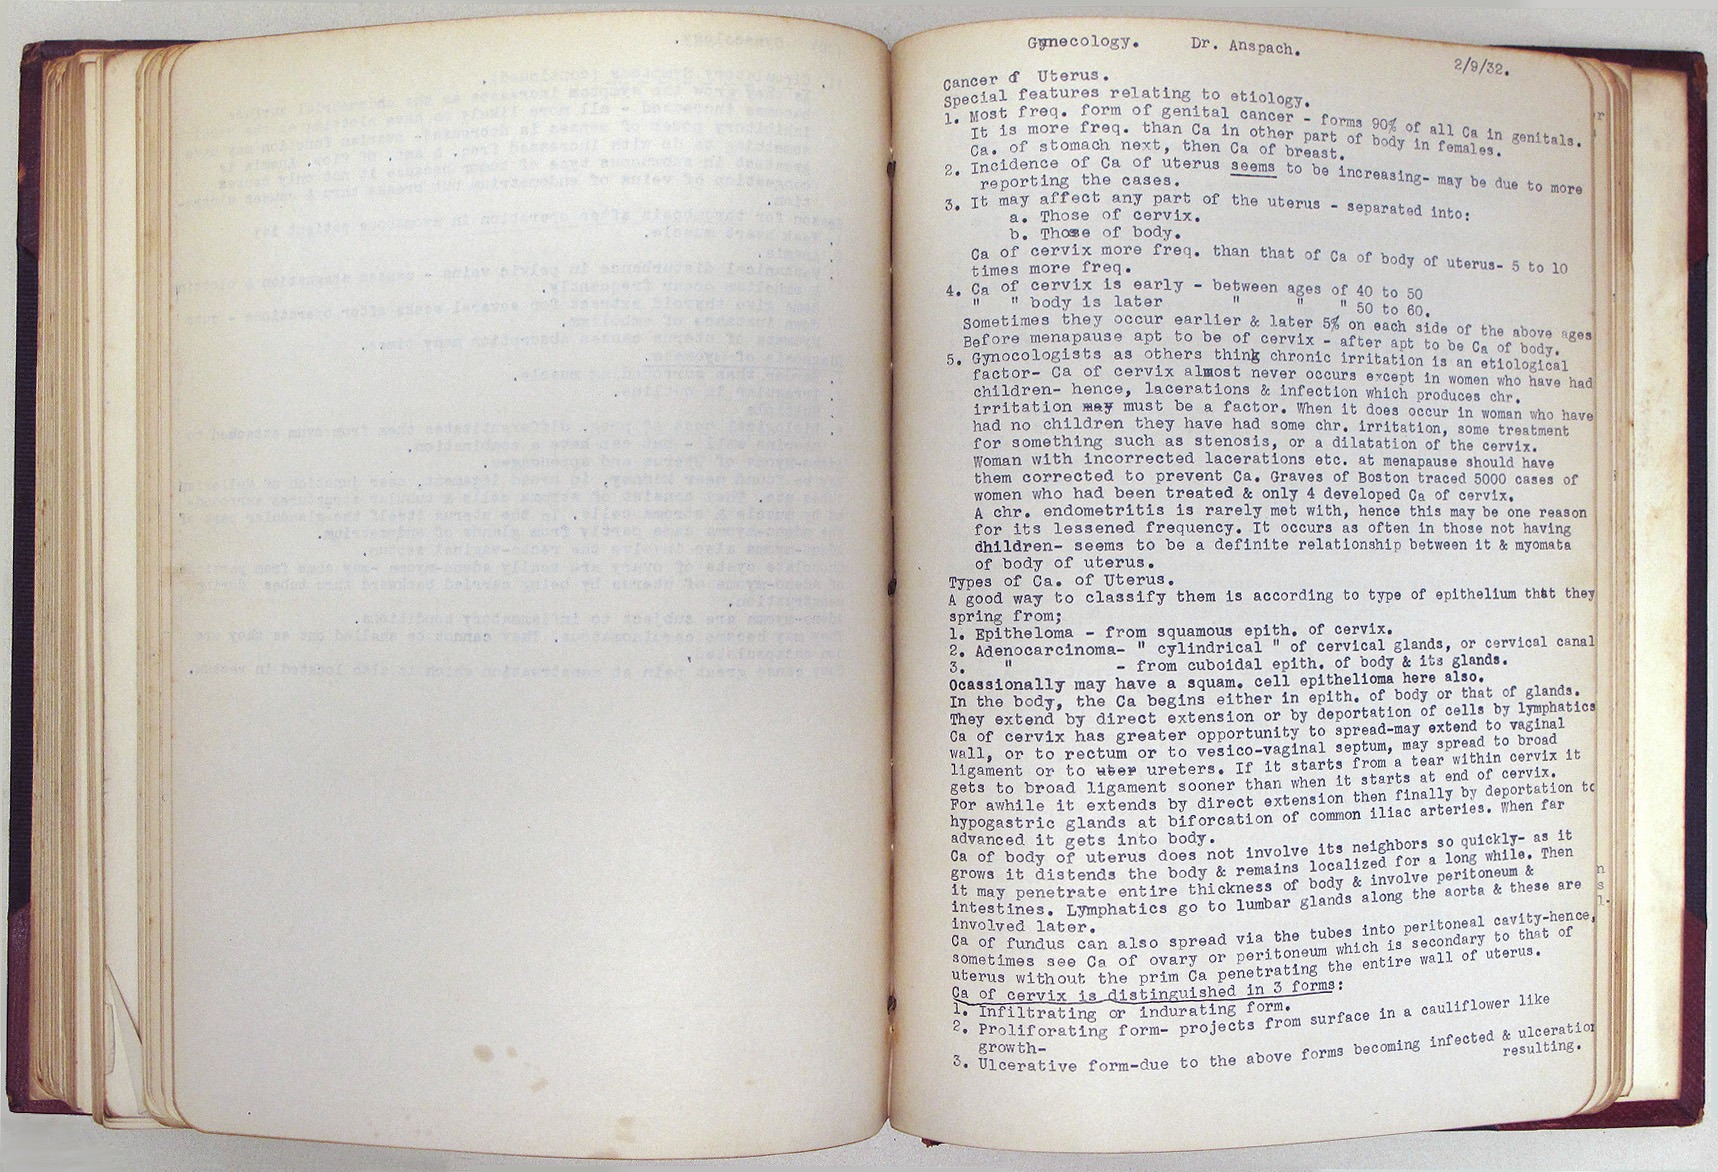 Page of notes about Cancer of Uterus, Feb. 9, 1932.